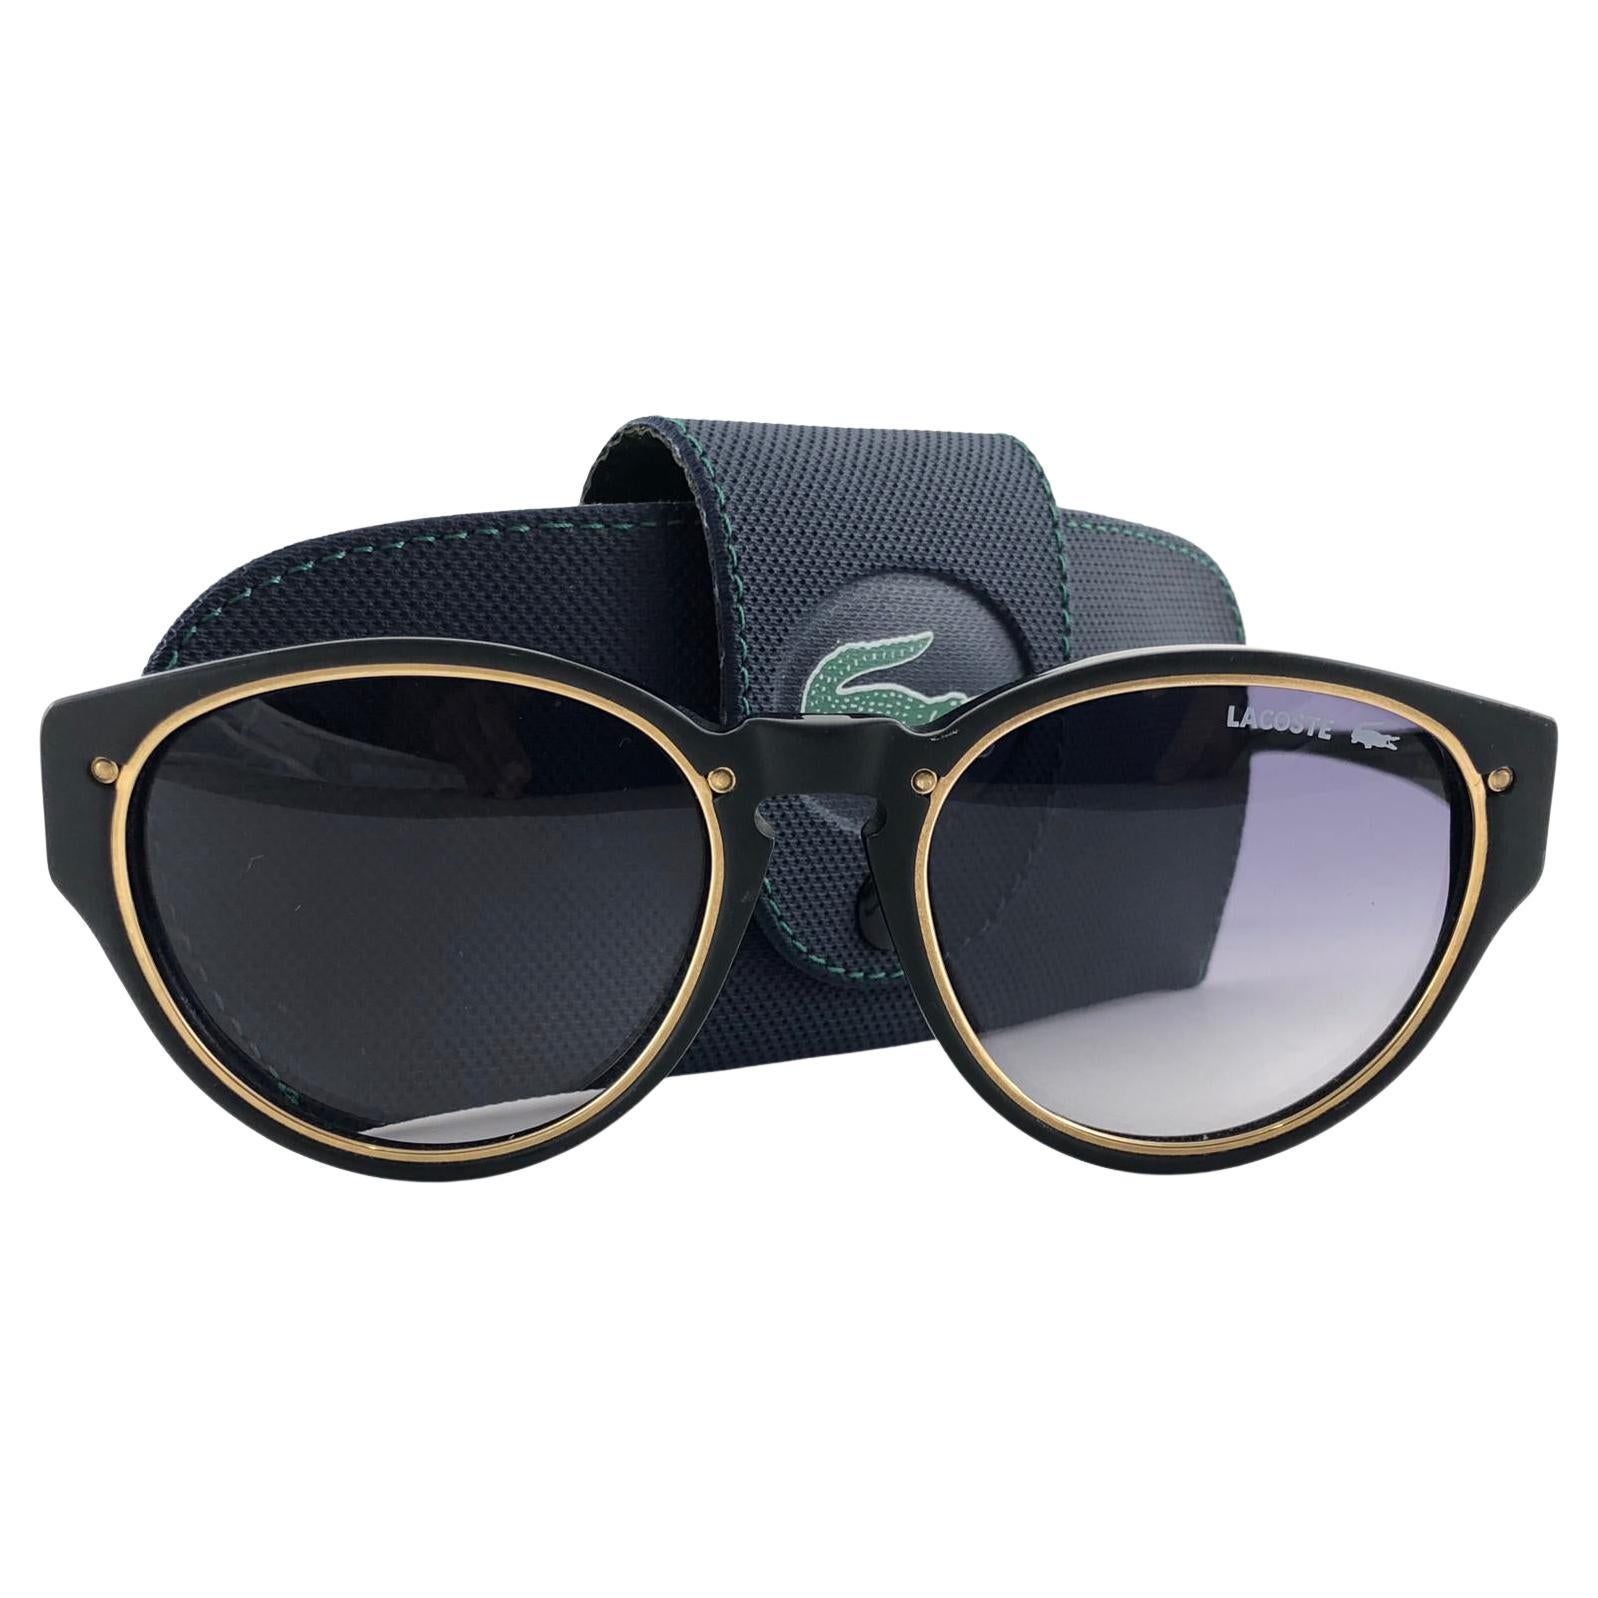 New Vintage Lacoste 124 Black & Gold Accents 1980's Sunglasses Made in France  For Sale